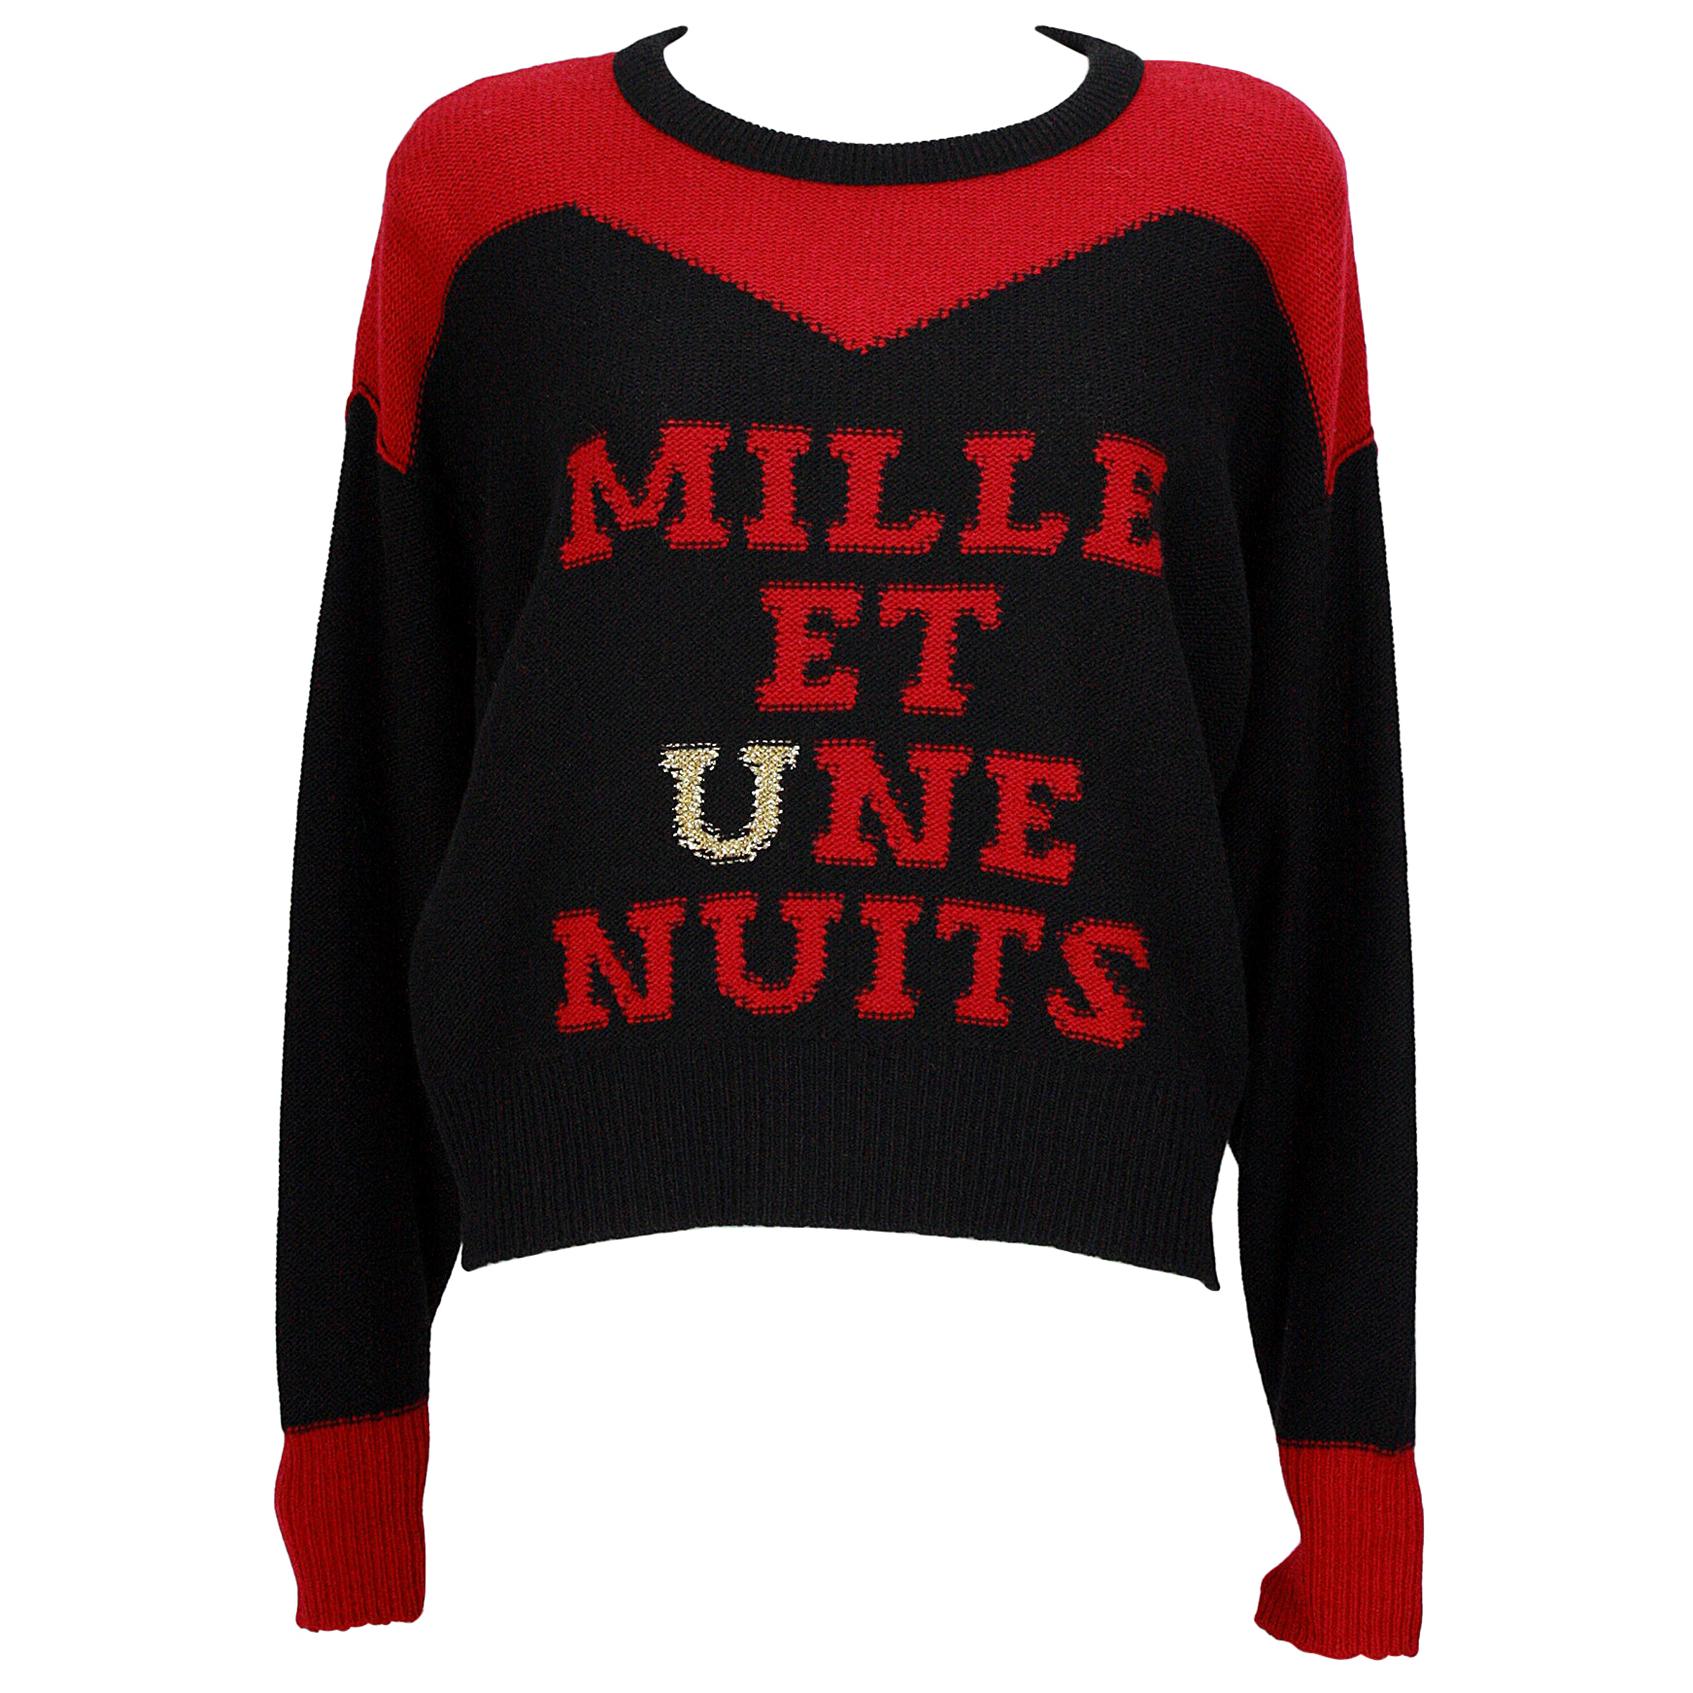 Sonia Rykiel "Mille Et Une Nuits" Red and Black Wool Sweater For Sale